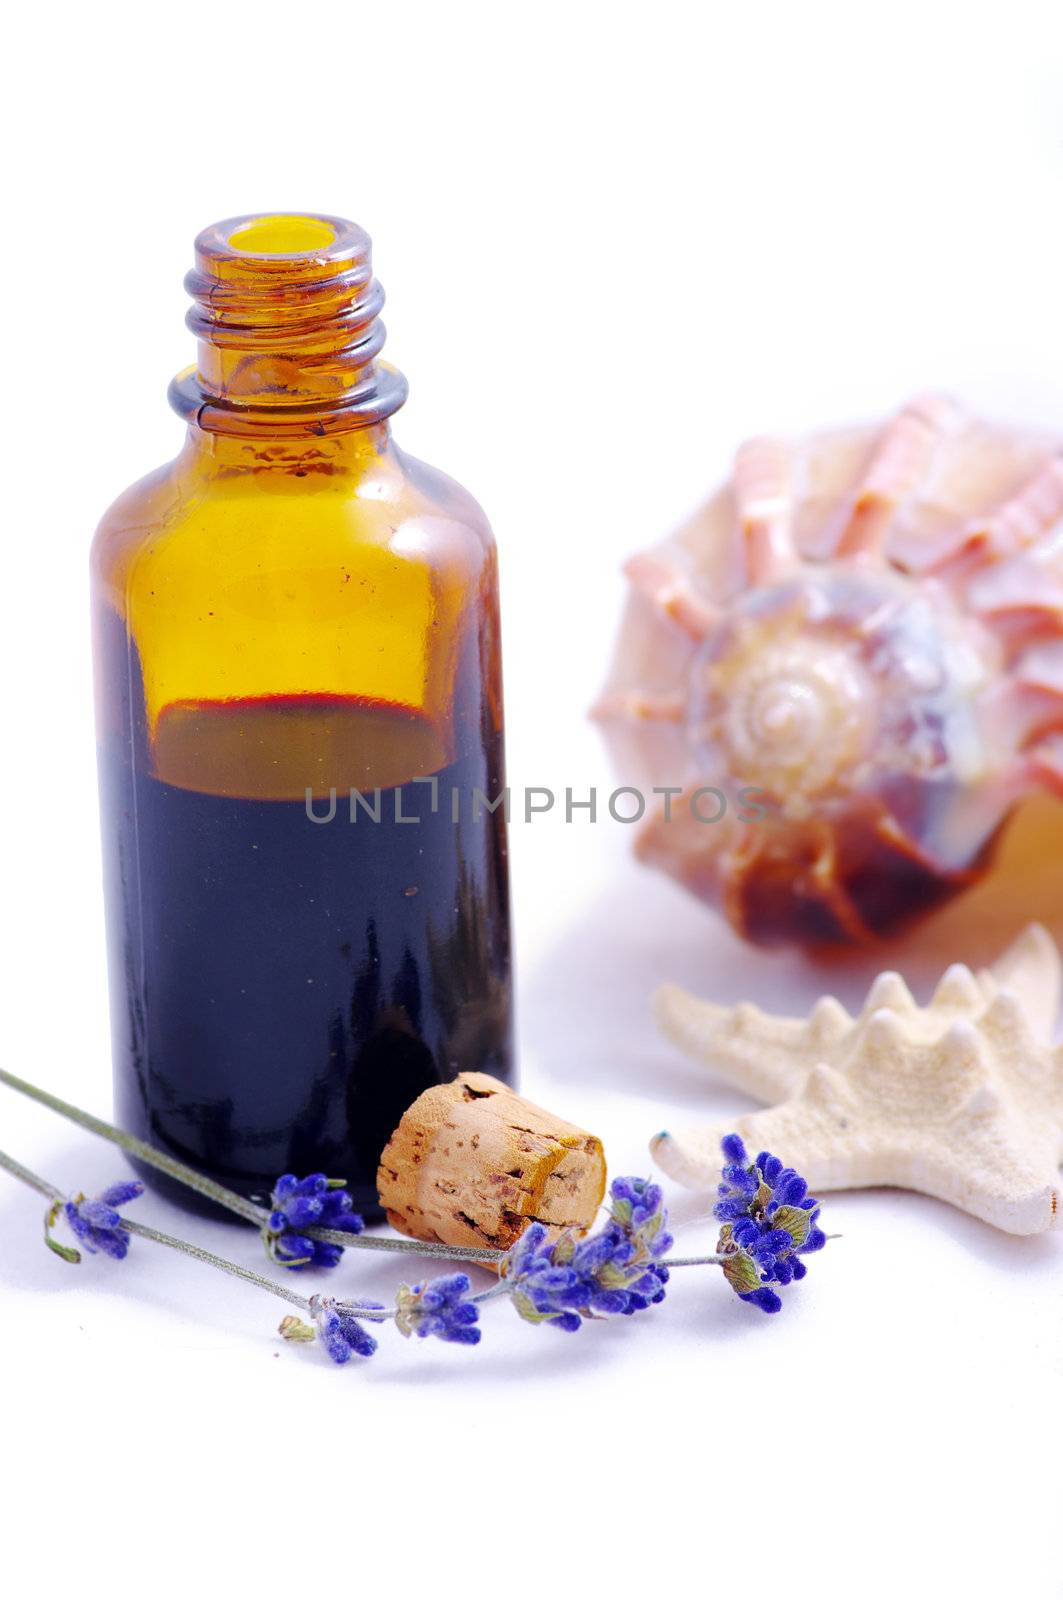 Herbal medicine with herbs and marine animals . Isolated white background.